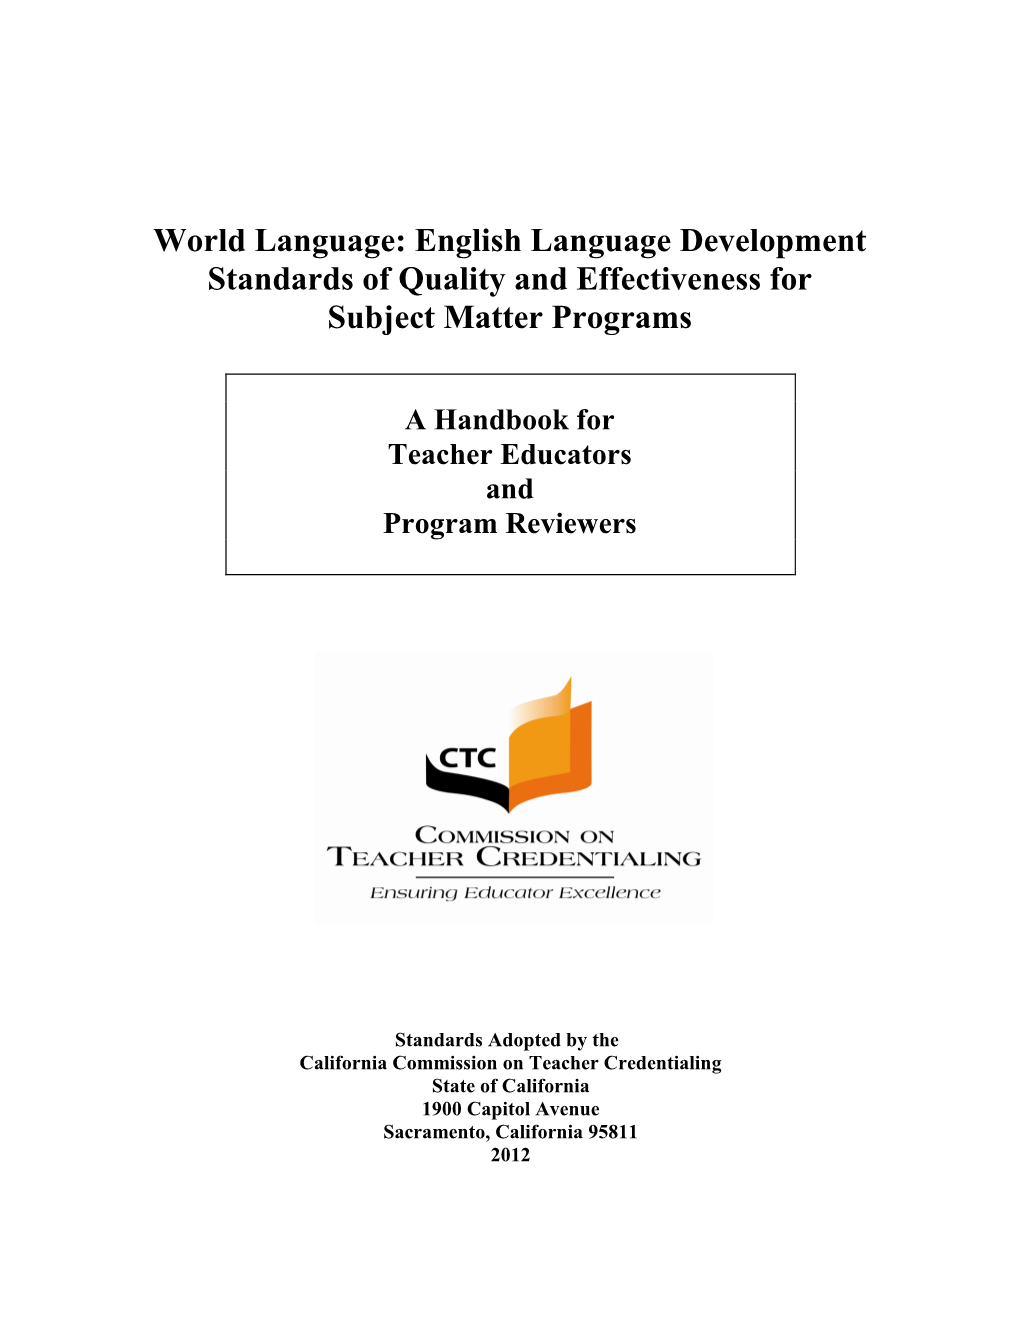 World Language: English Language Development Standards of Quality and Effectiveness for Subject Matter Programs